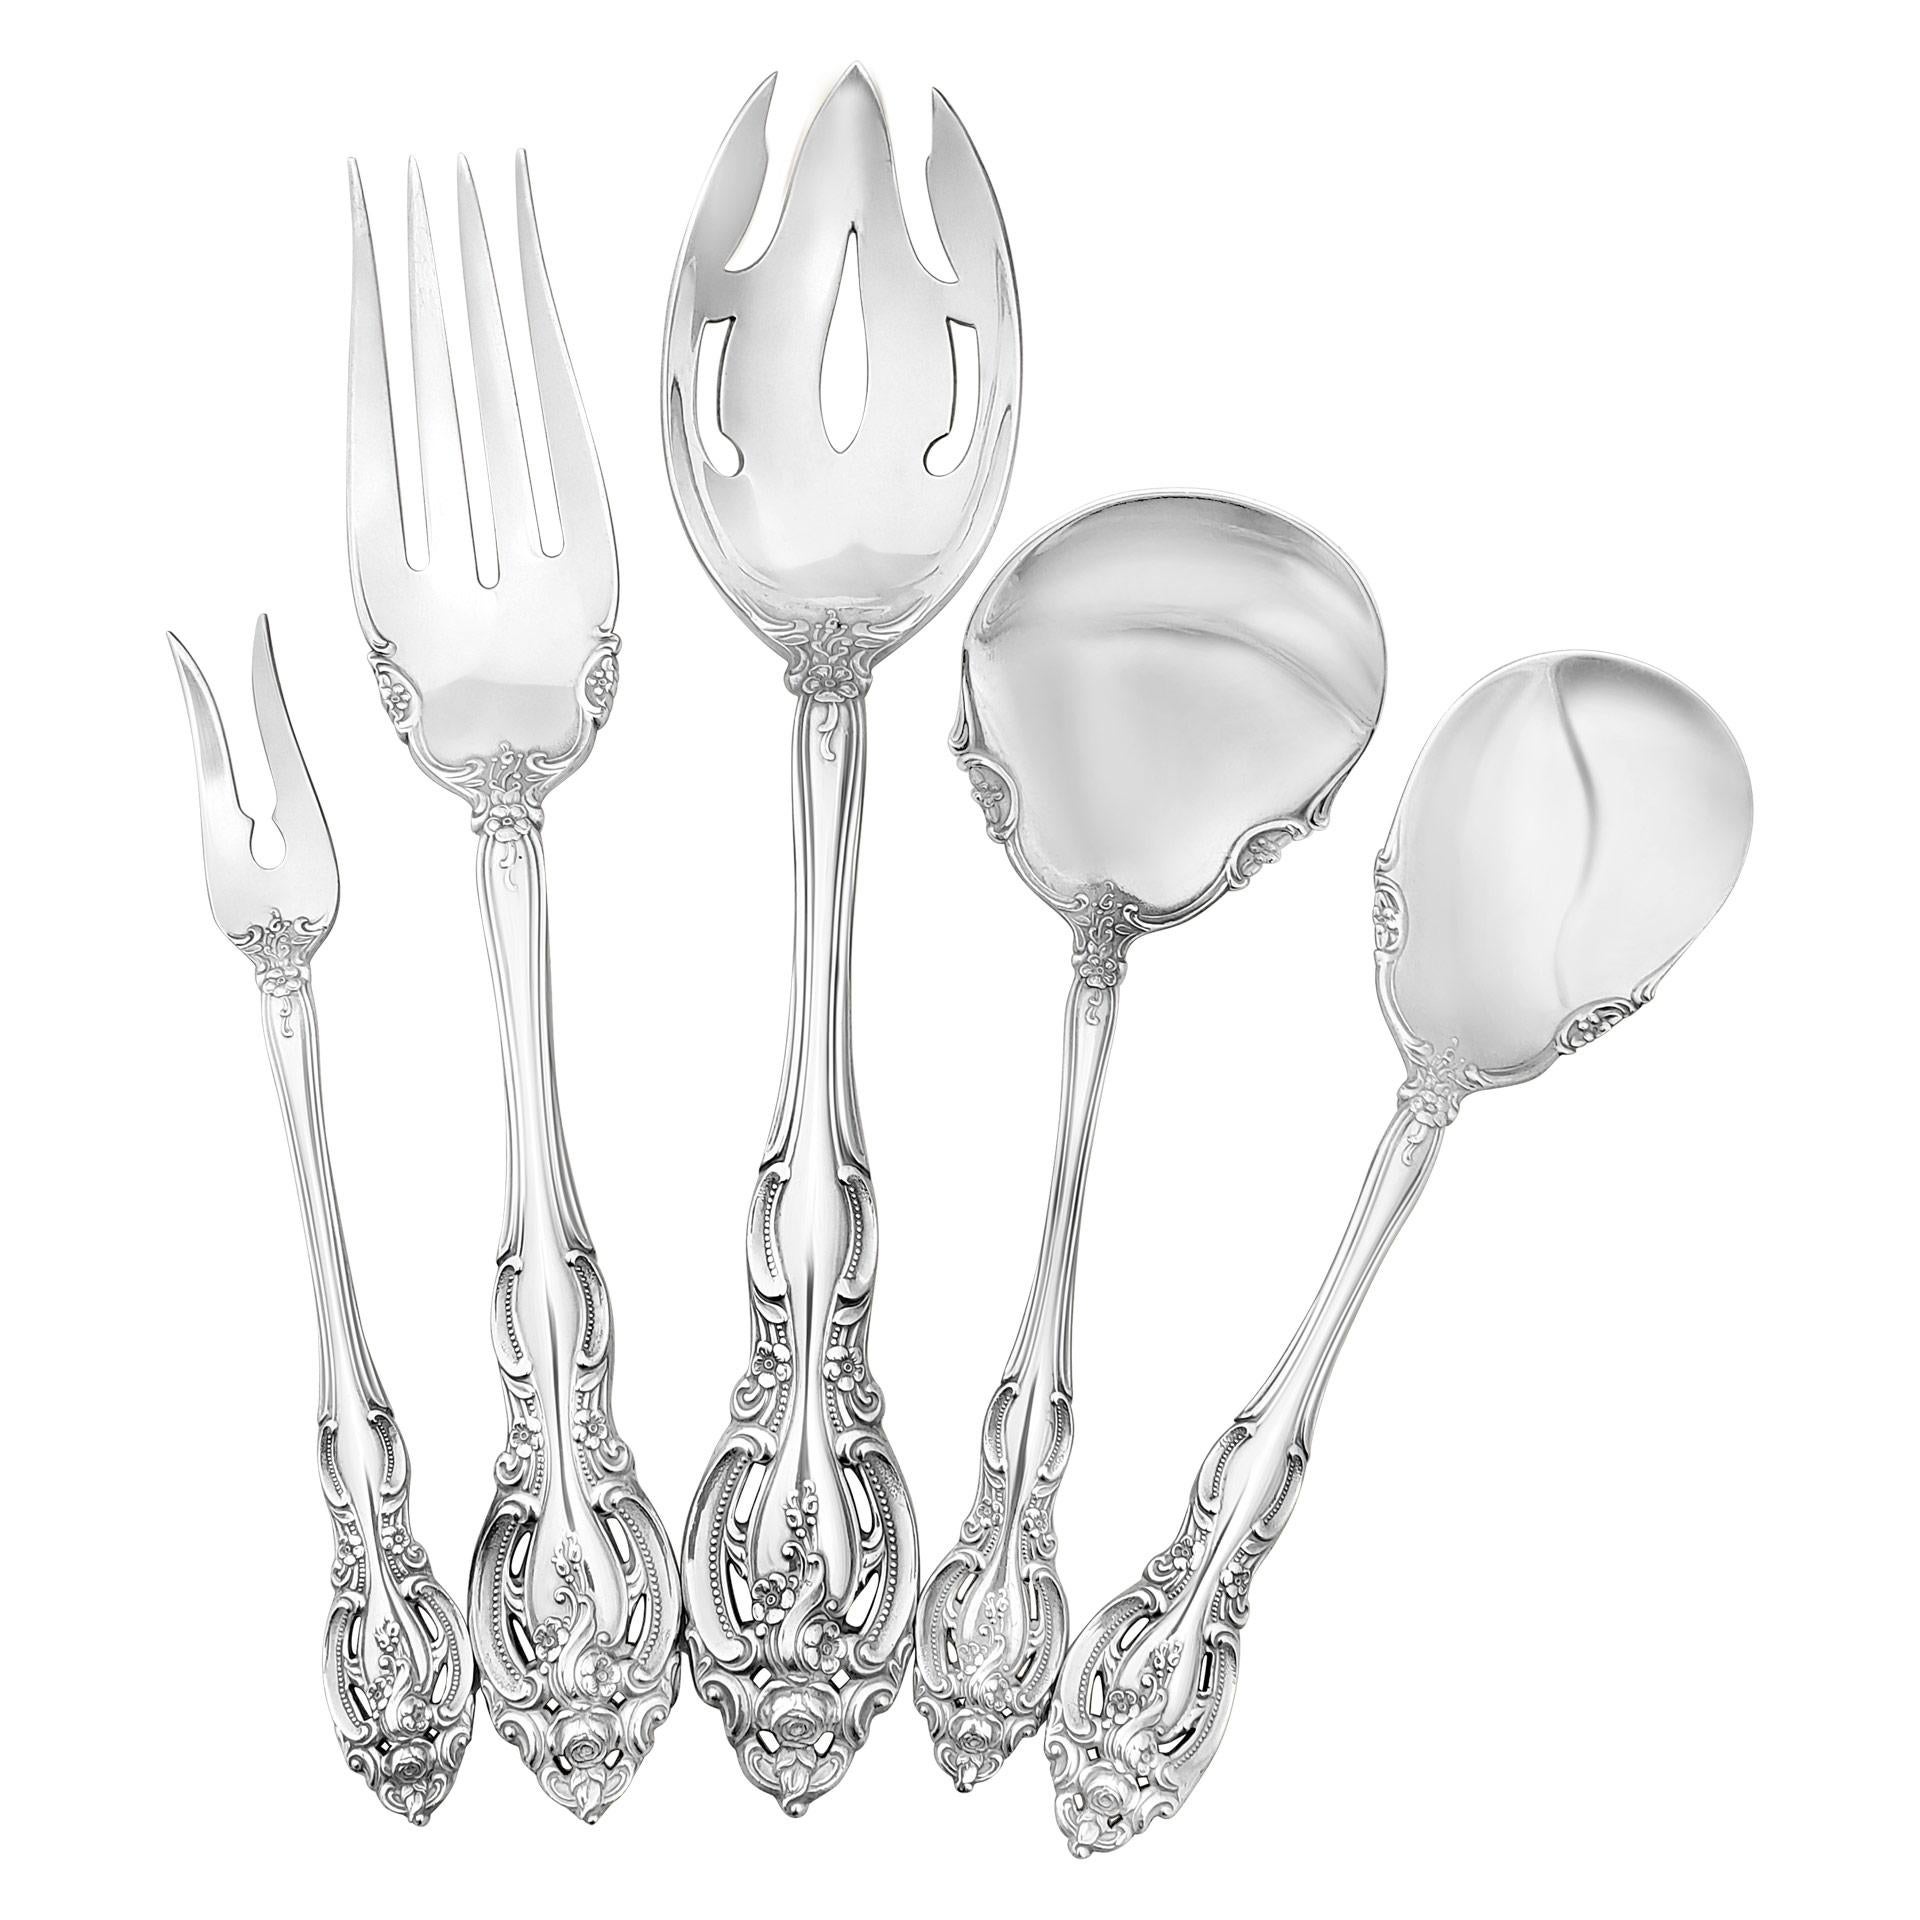 LA SCALA Sterling silver flatware set patented in 1964 by Gorham. 6 Place setting for 12 with 7 serving pieces. Over 3300 grams sterling silver (106 ounces troy). PLACE SETTINGS: 12 dinner knife (9